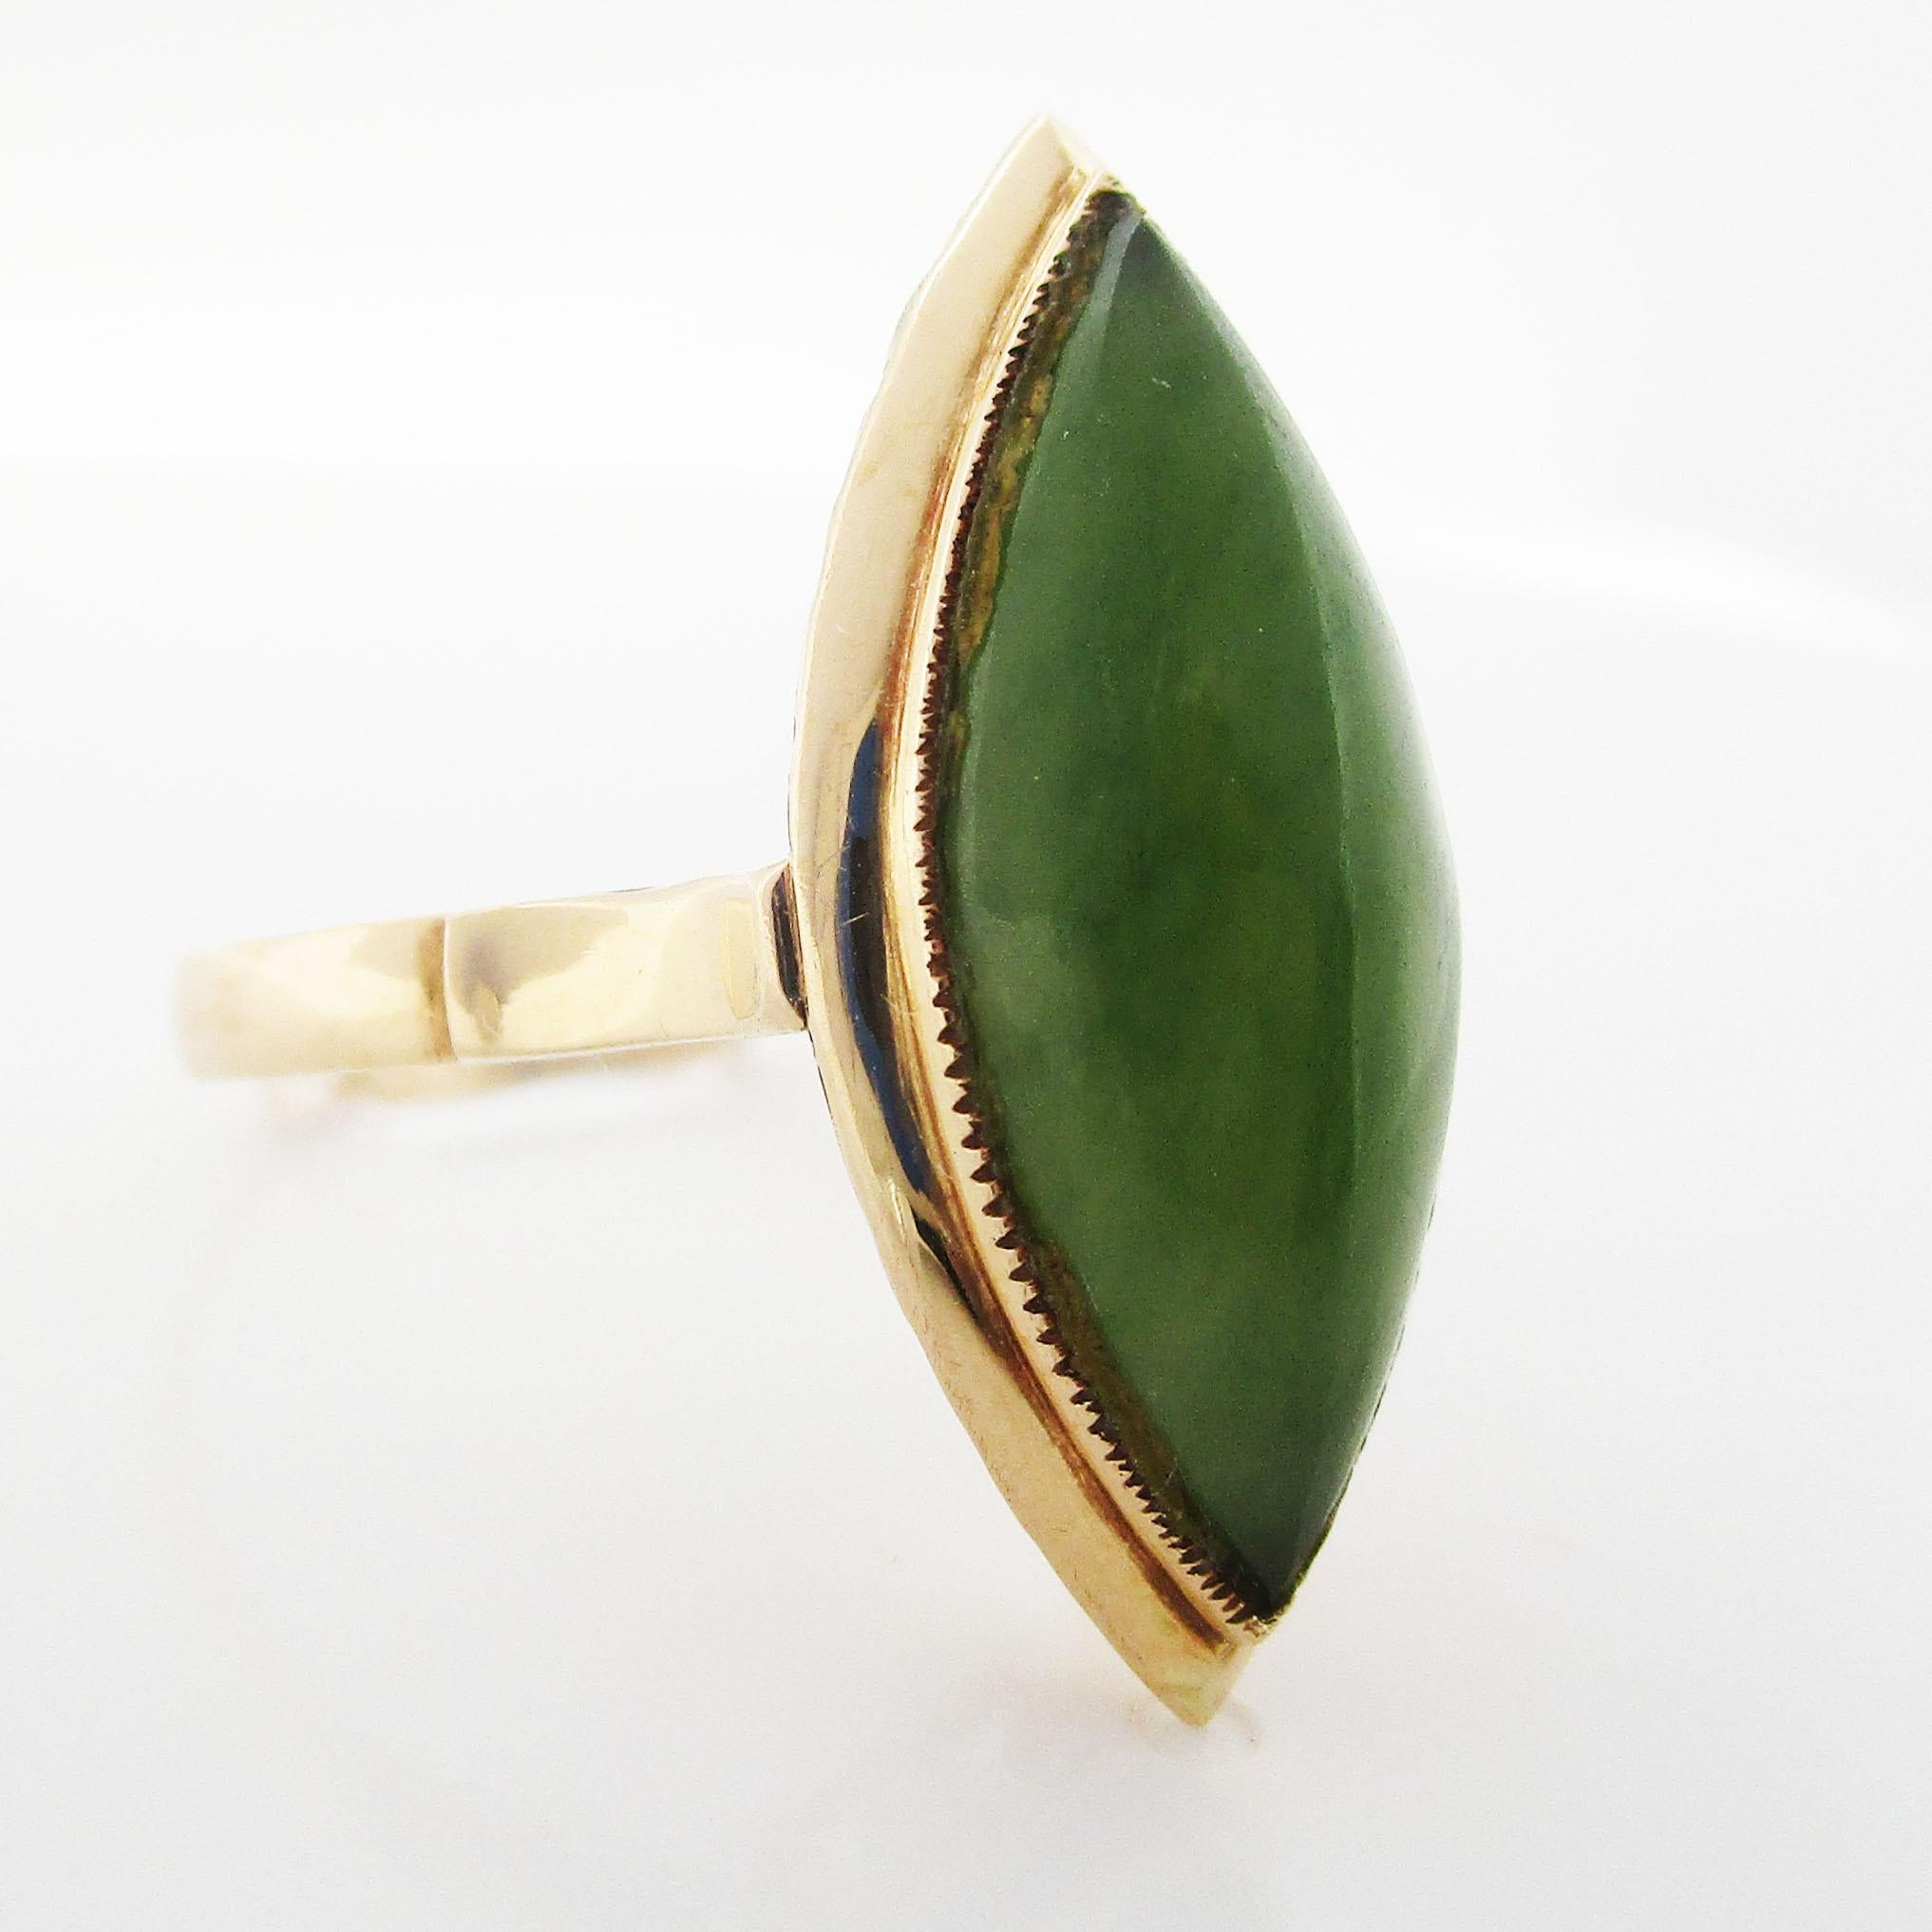 This is a captivating 14K Yellow Gold Ring, featuring an exquisite Nephrite Jade cabochon. 

The stone is an exceptional 21 mm x 9 mm. The under gallery is constructed with enchanting filigree detailing that allows light to come through the jade,